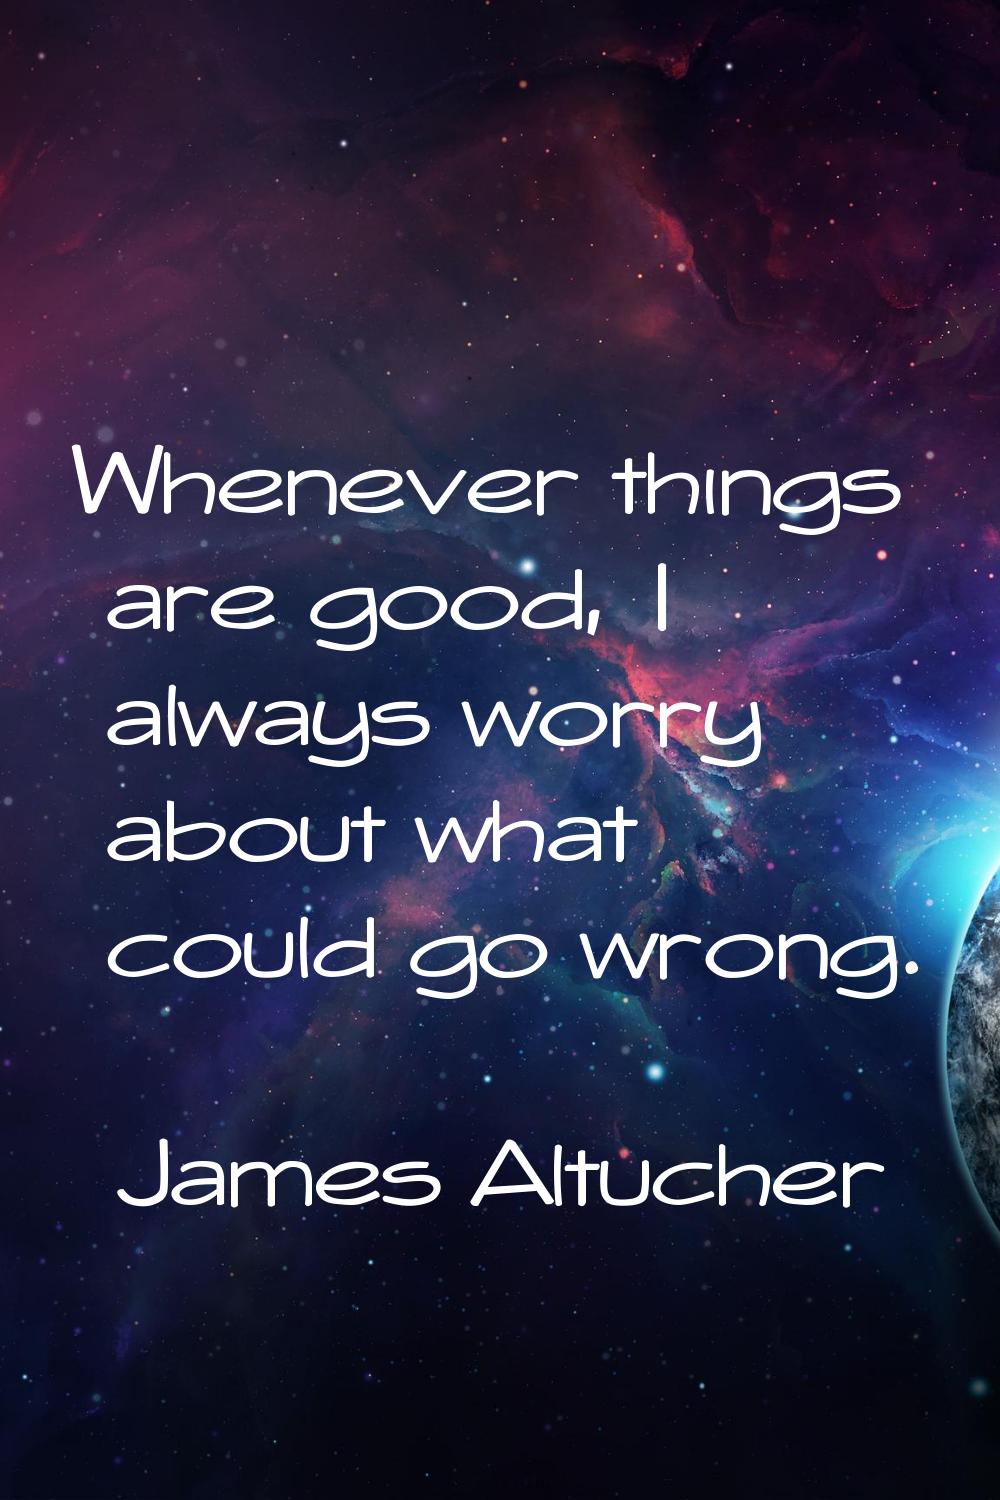 Whenever things are good, I always worry about what could go wrong.